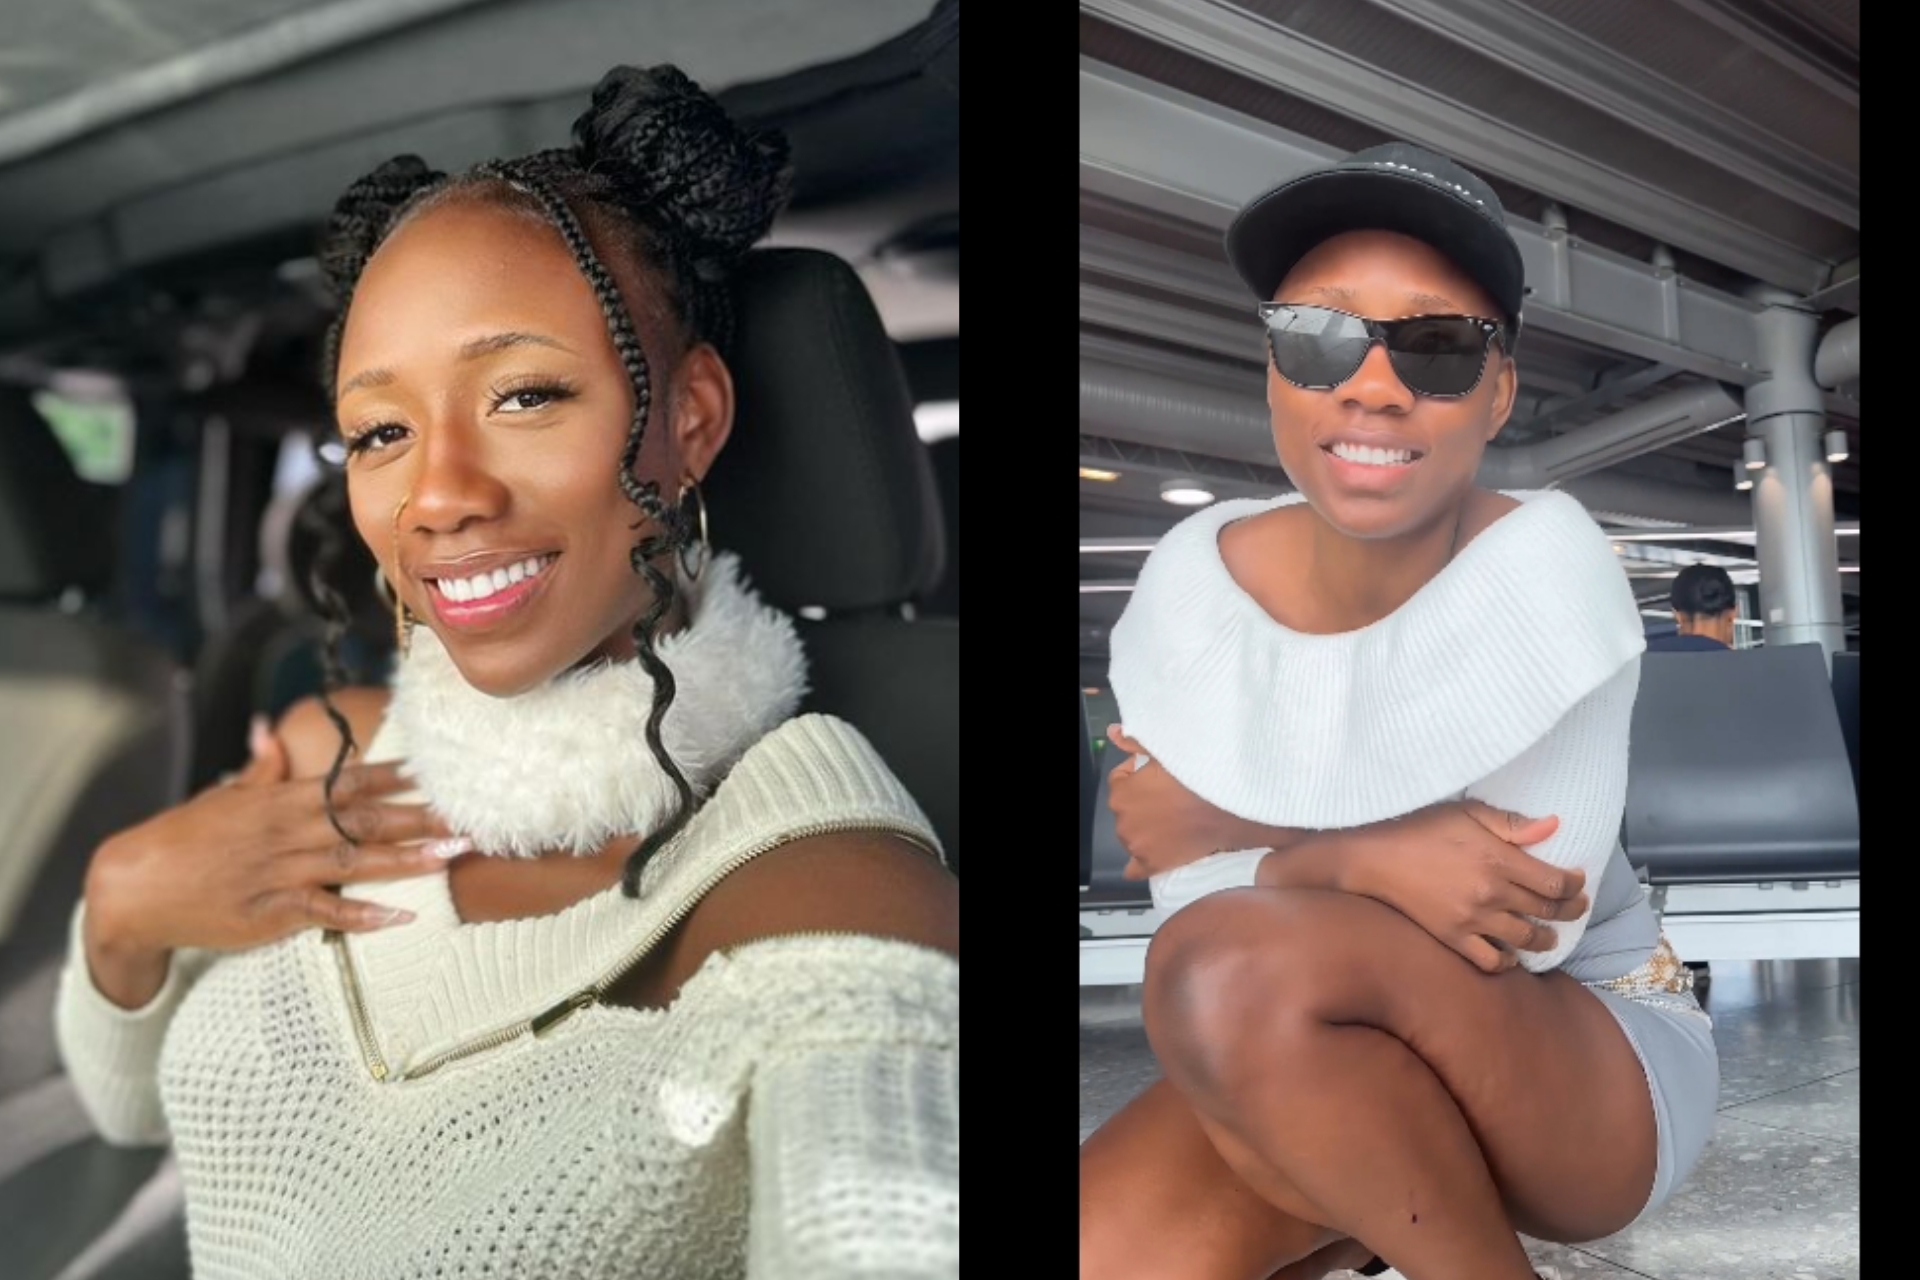 Korra Obidi appreciates fans for their support following the brutal attack